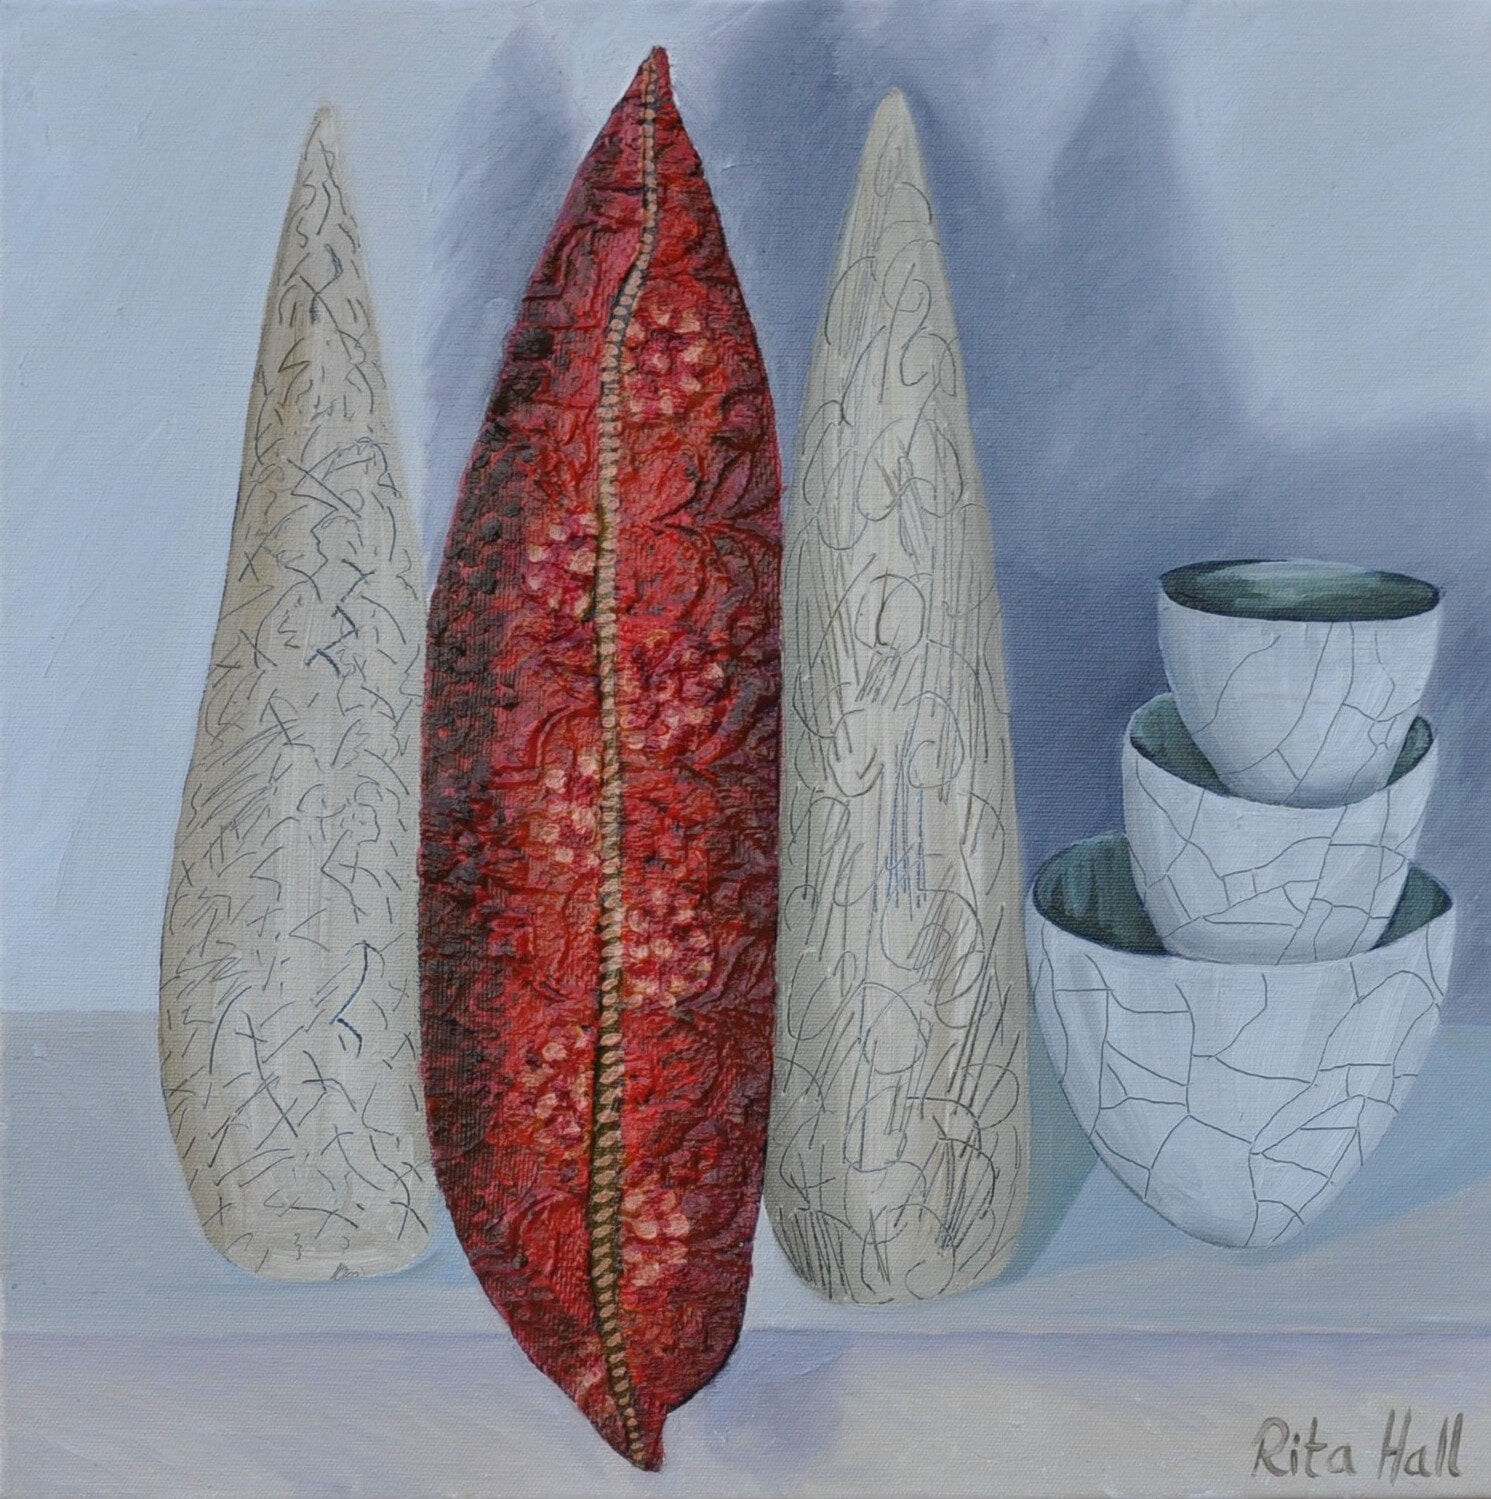 20. Three Bowls Oil and Collage on Canvas 45 x 45cm